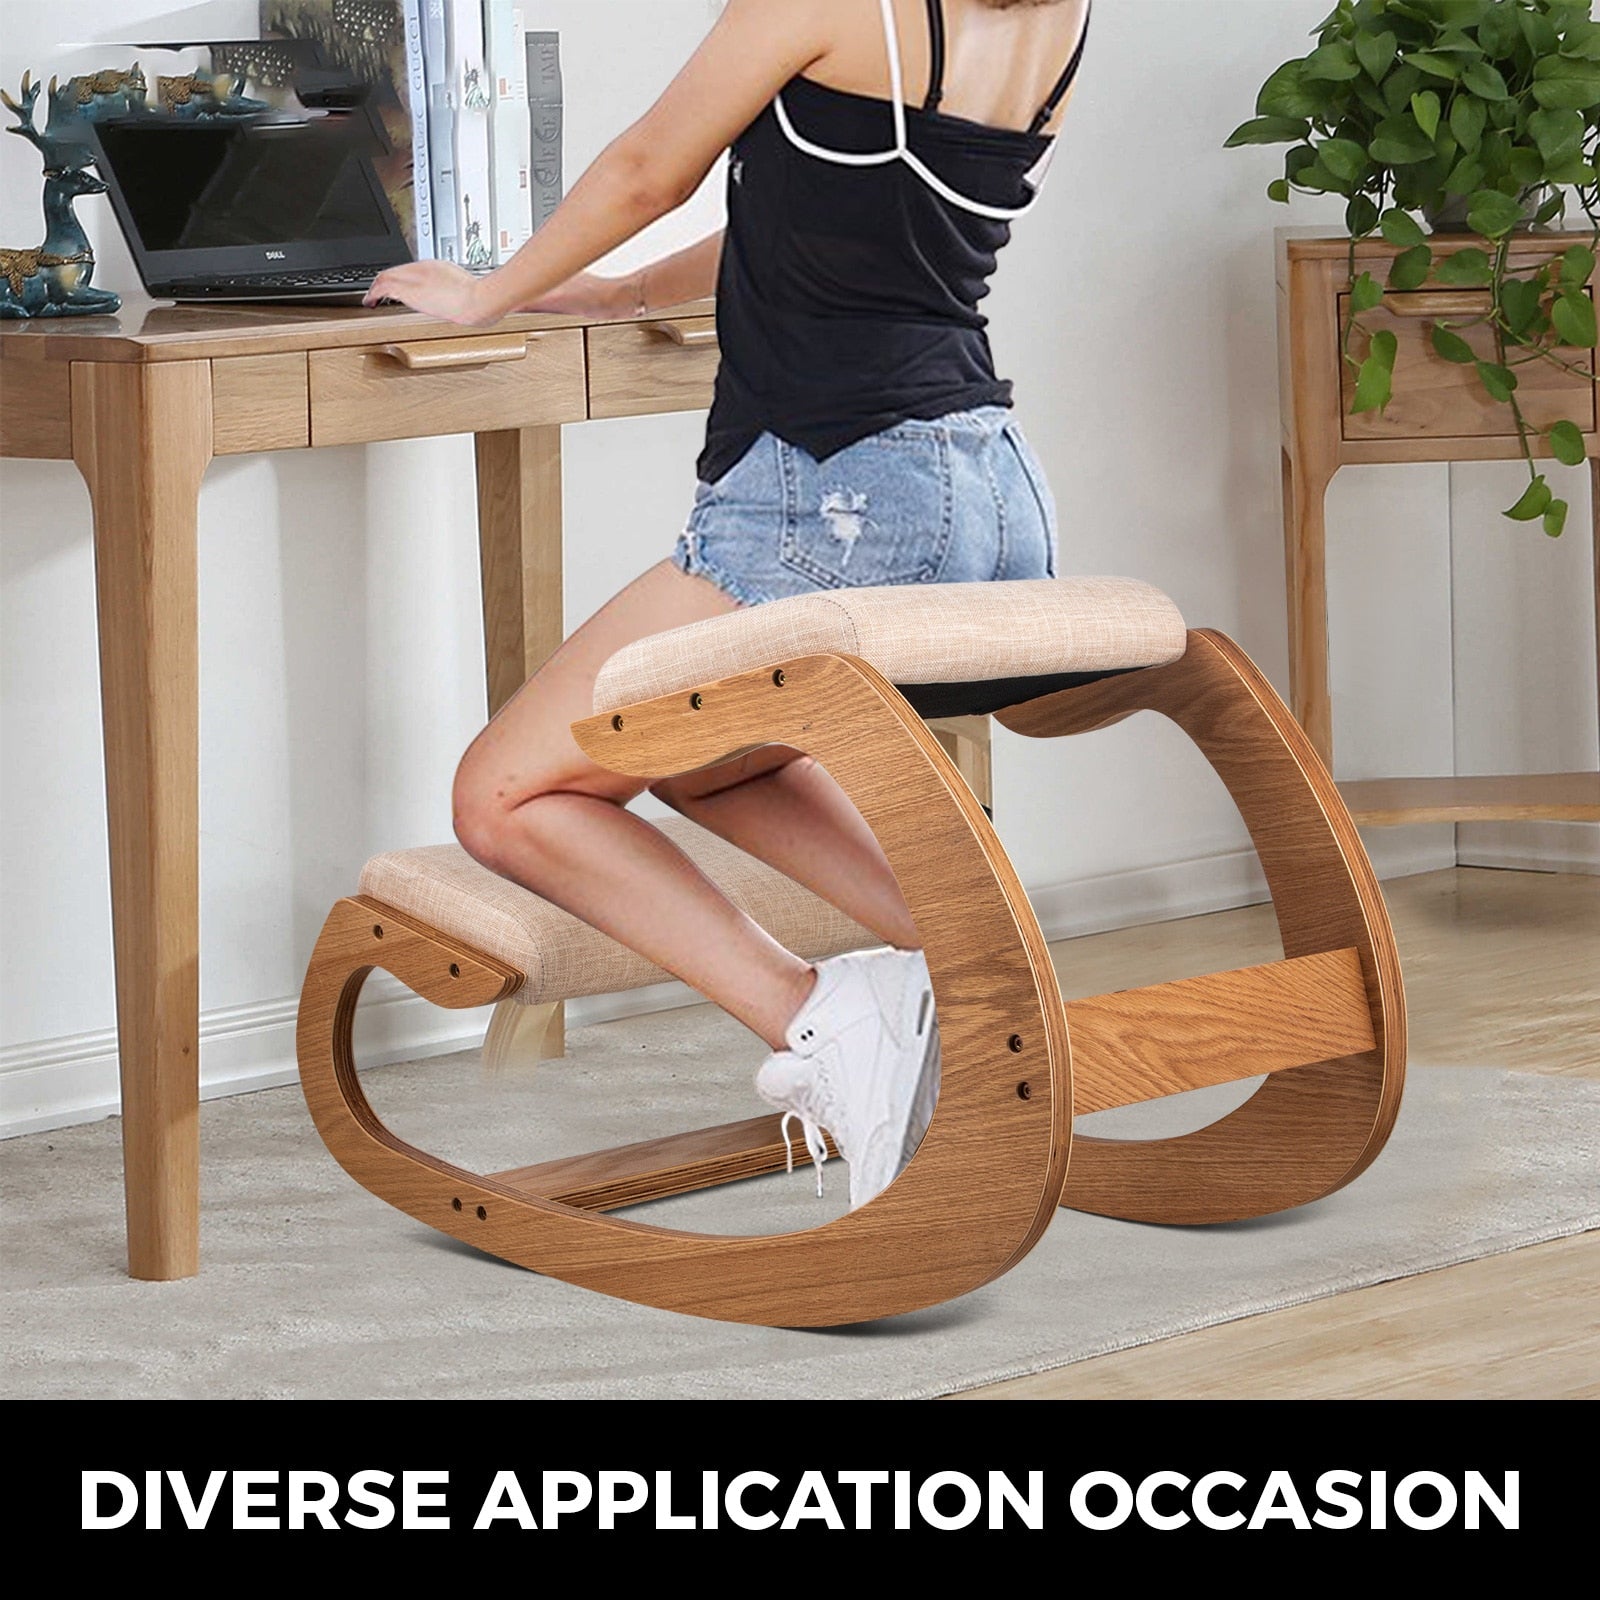 VEVOR Ergonomic Rocking Wooden Kneeling Chair Stool Correct Posture Computer Chair Original Home Office Furniture Thick Cushion